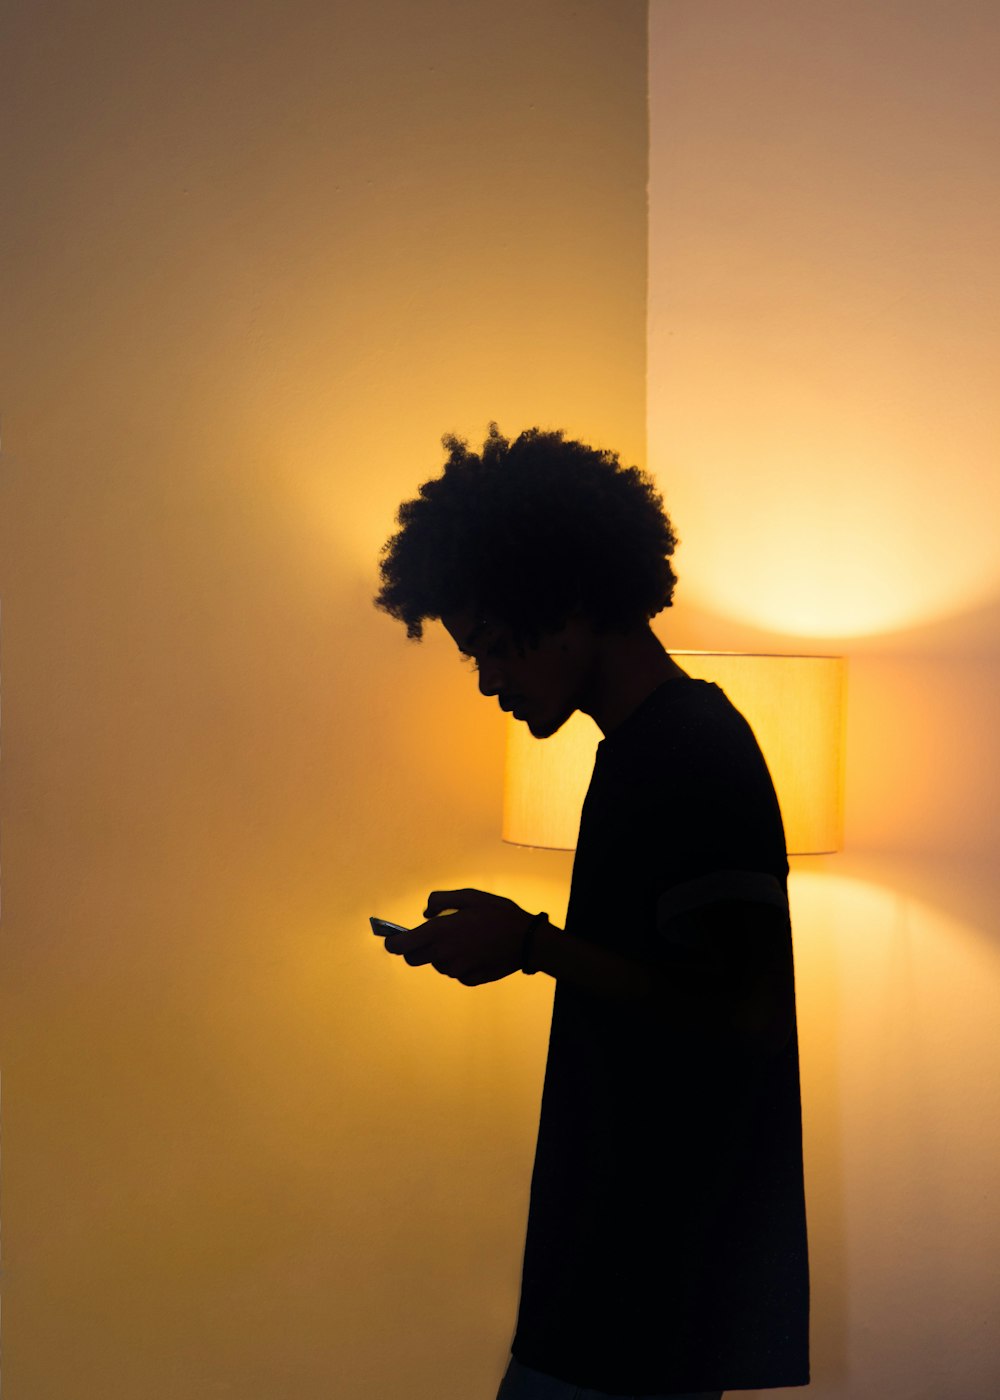 a man standing in front of a lamp using a cell phone